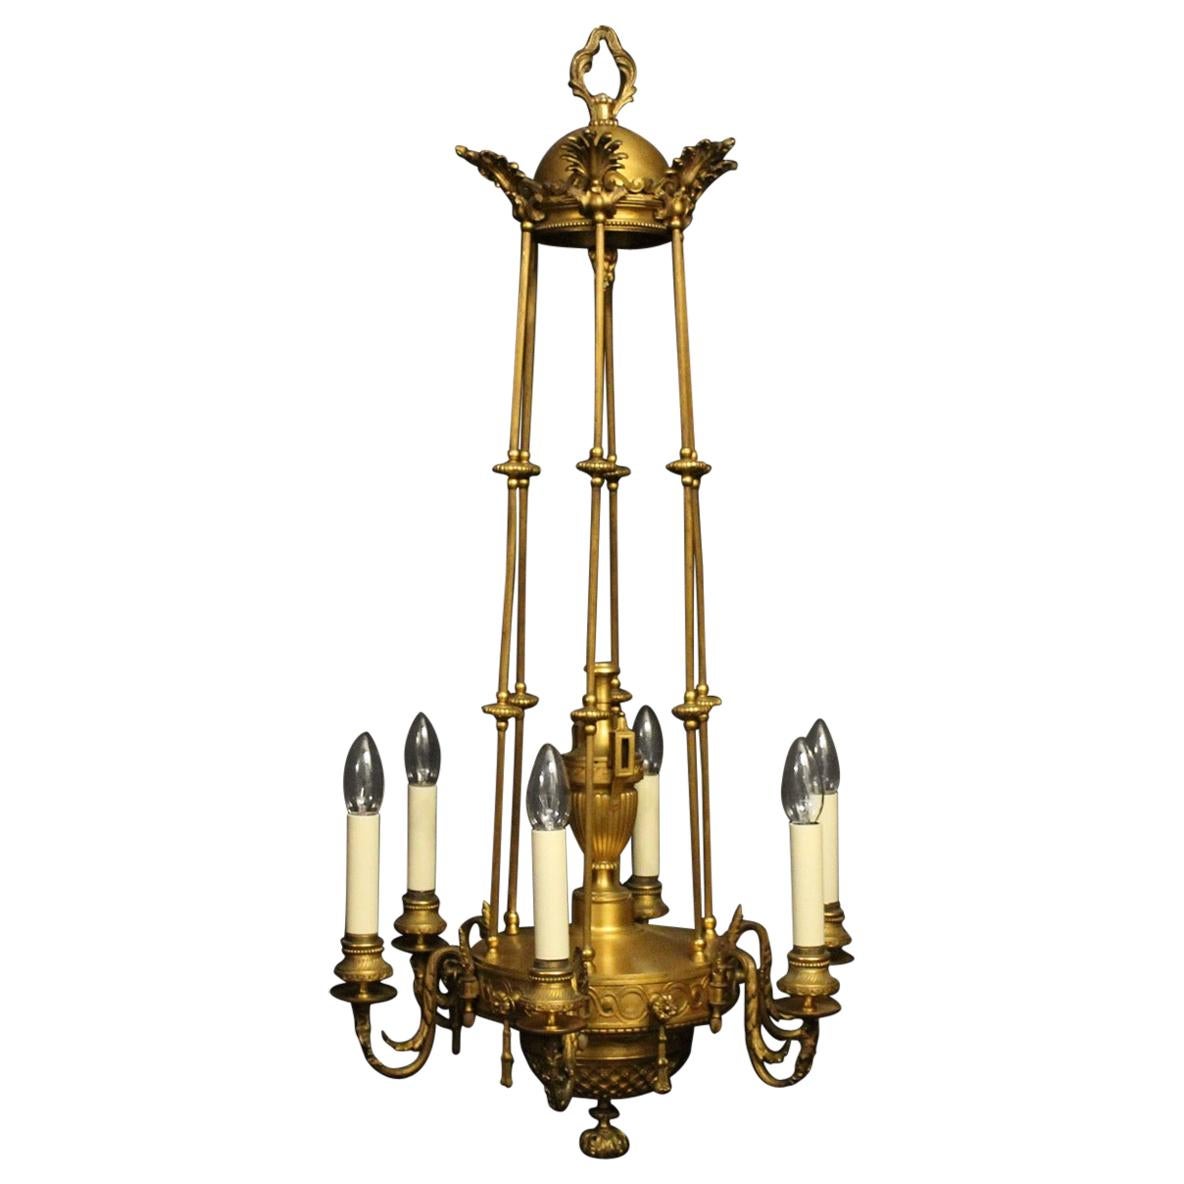 French Mid-19th Century F. Barbedienne Antique Bronze Chandelier For Sale